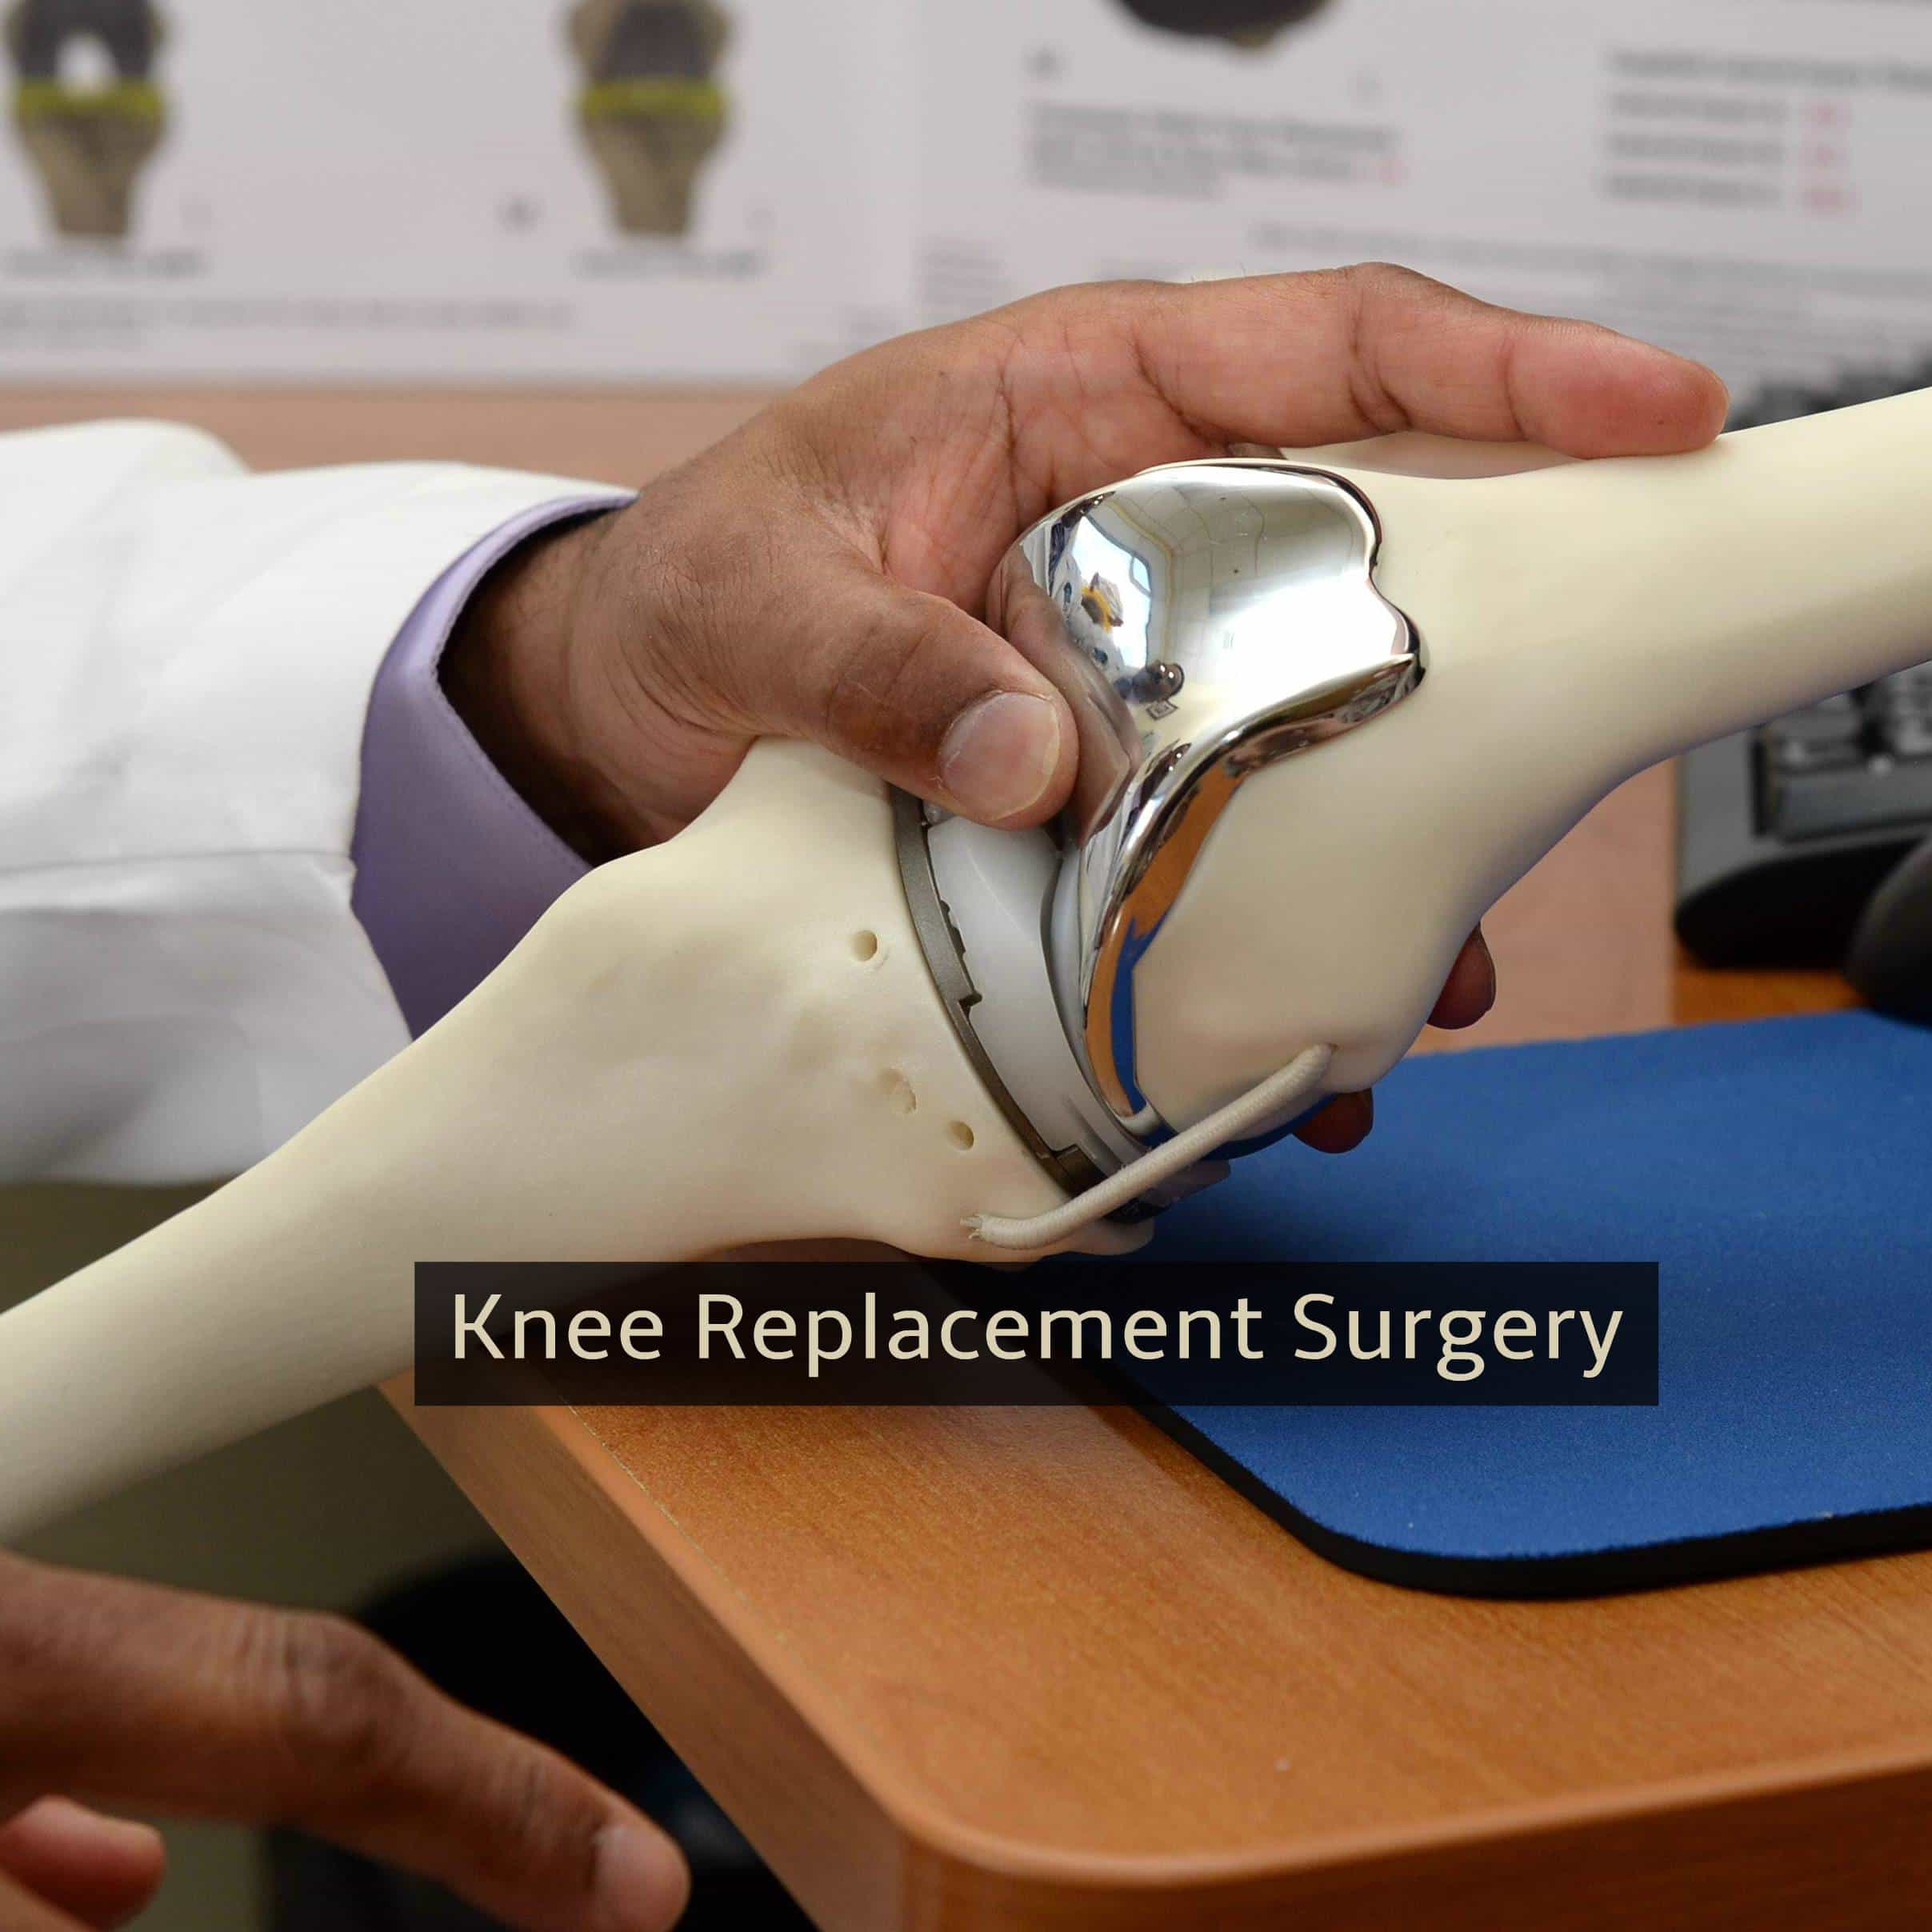 Knee Replacement Surgery â What to Expect During Recovery?